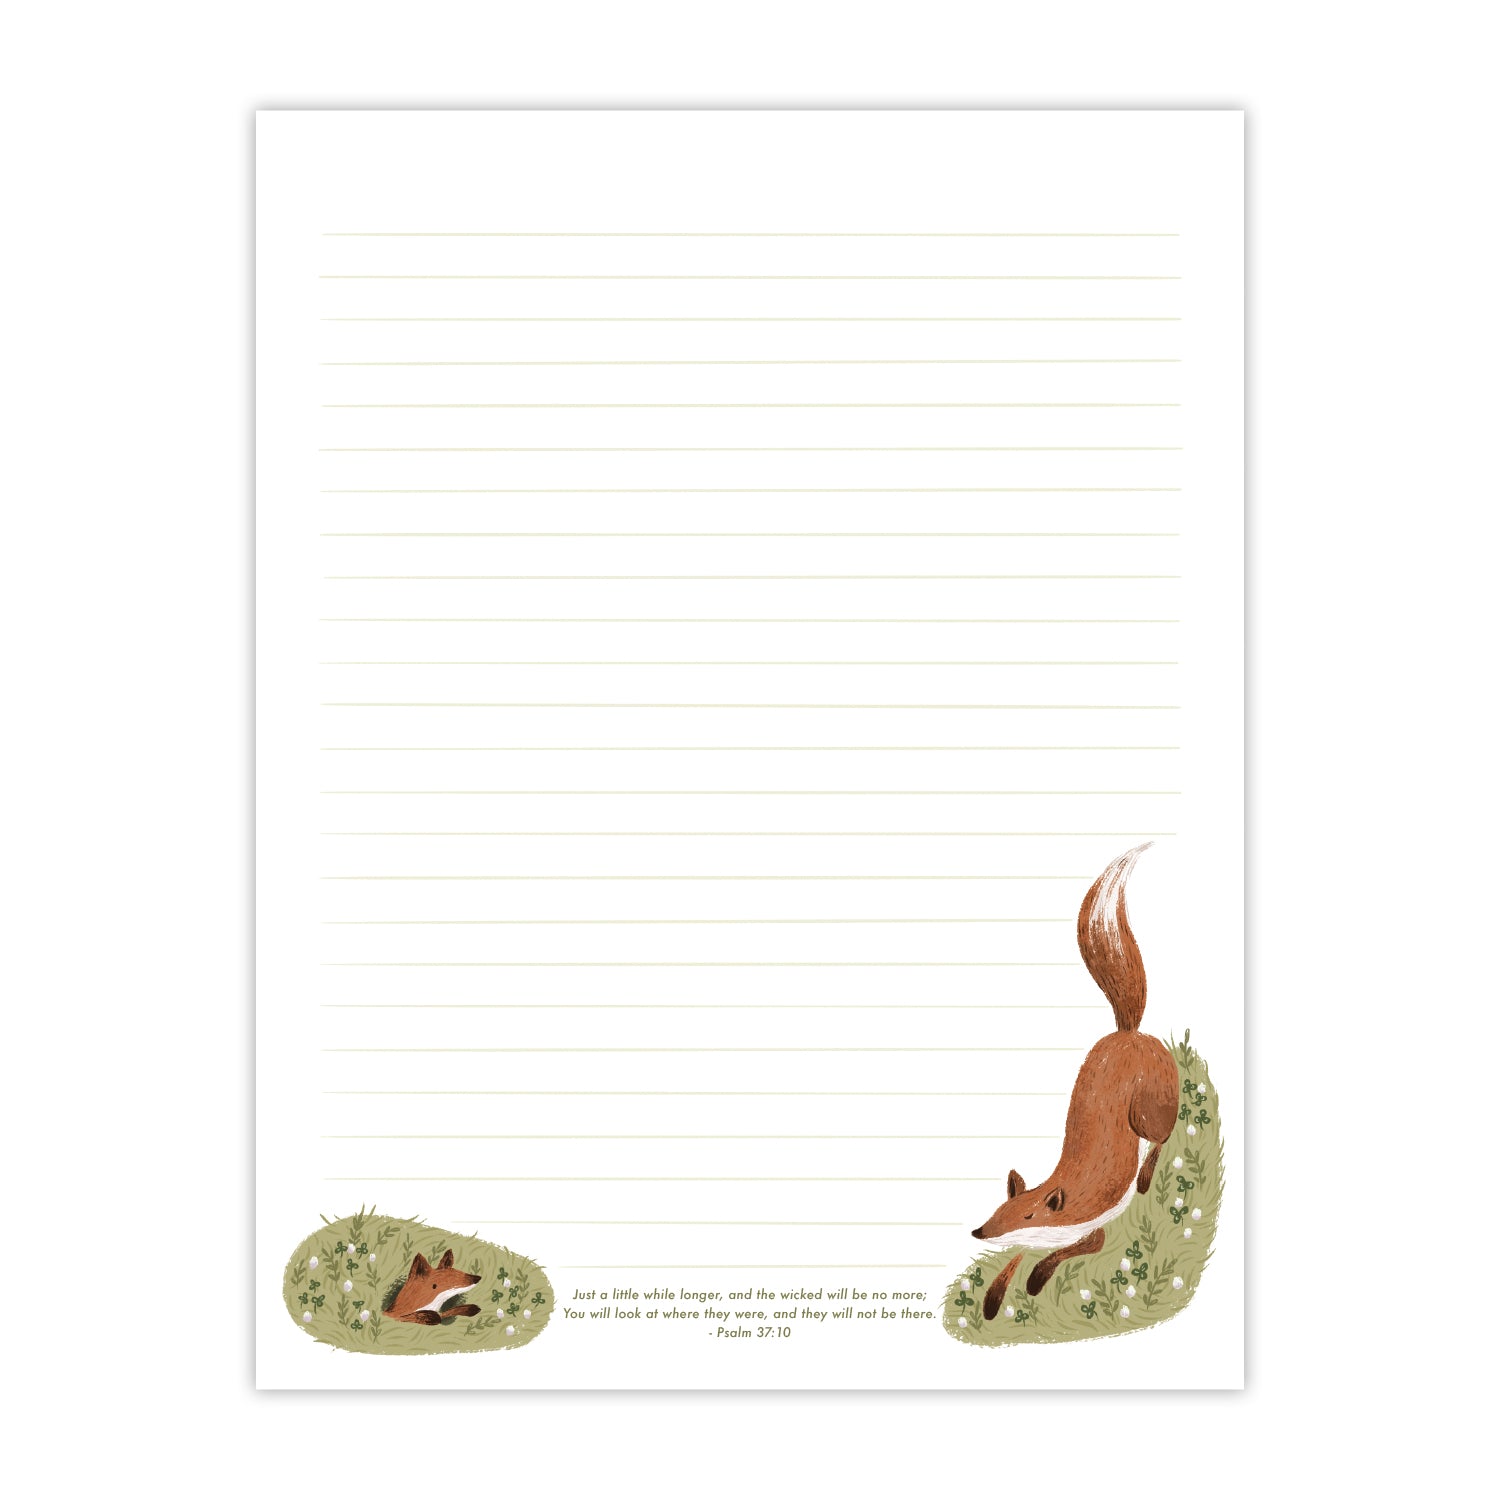 Printable Letter Writing Sheets - Fox and Den - Just a little while longer, and the wicked will be no more - Psalm 37:10